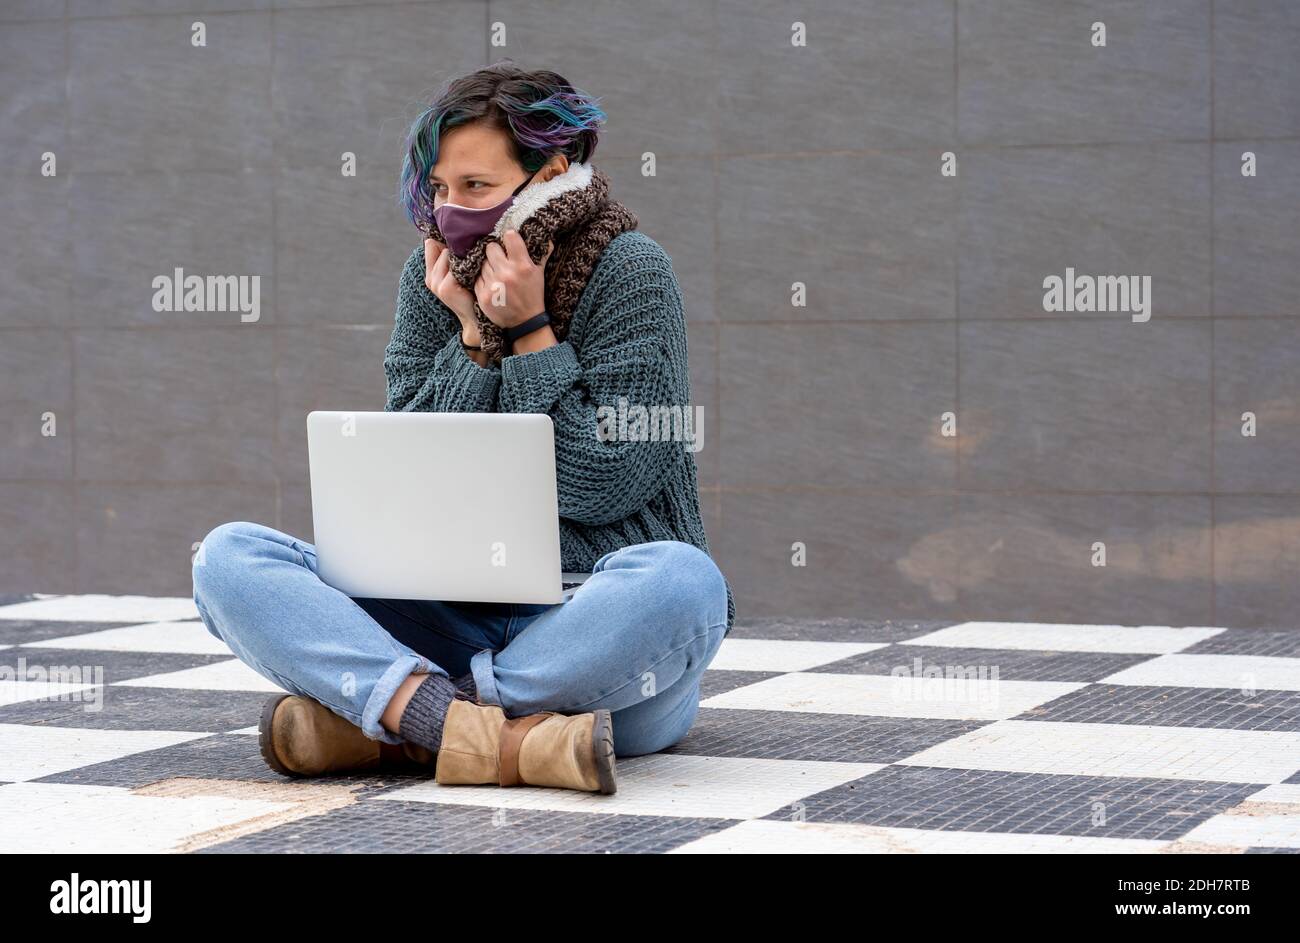 A stylish young lady sitting on a checkered floor in a park using her laptop wearing a sanitary mask Stock Photo